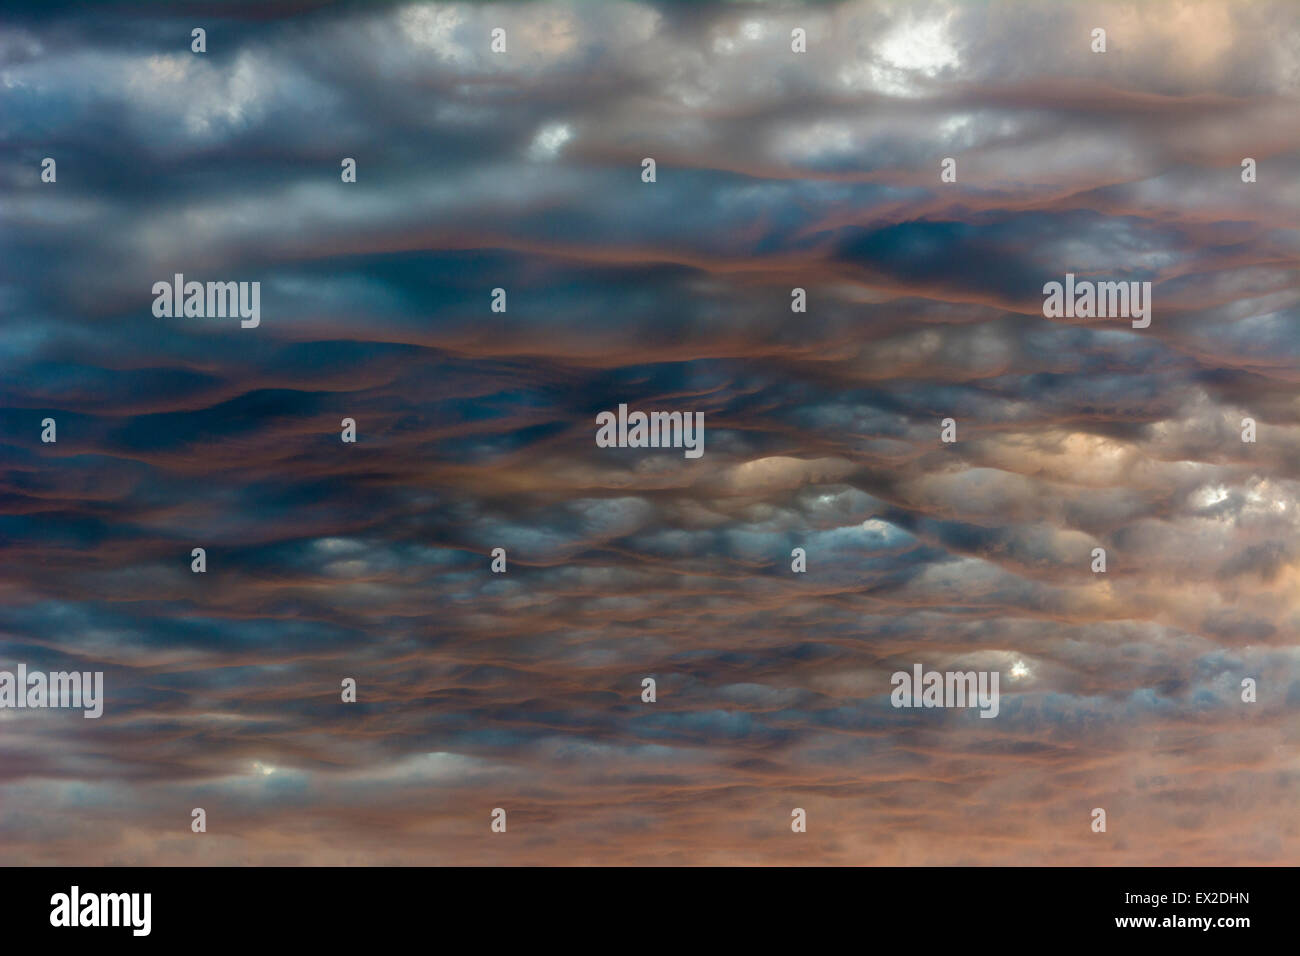 Altocumulus undulatus clouds illuminated from underneath by the warm light of the setting sun. Stock Photo